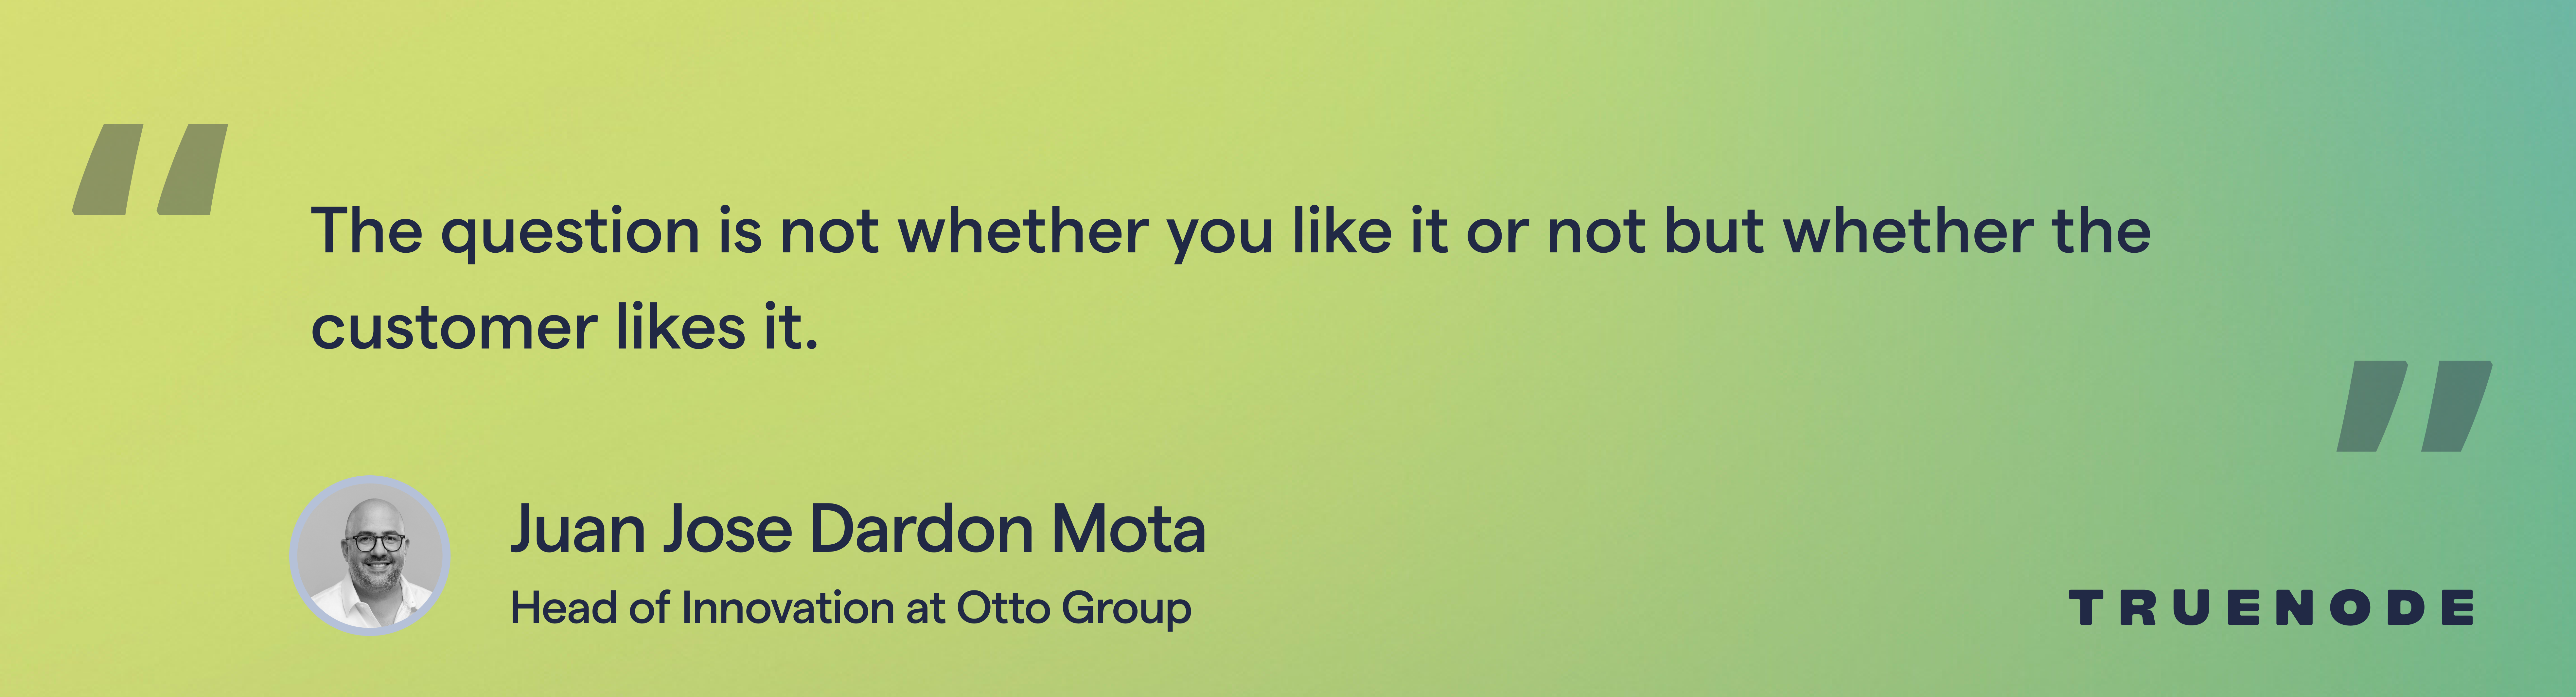 Advice for building products by Otto Group's Head of Innovation